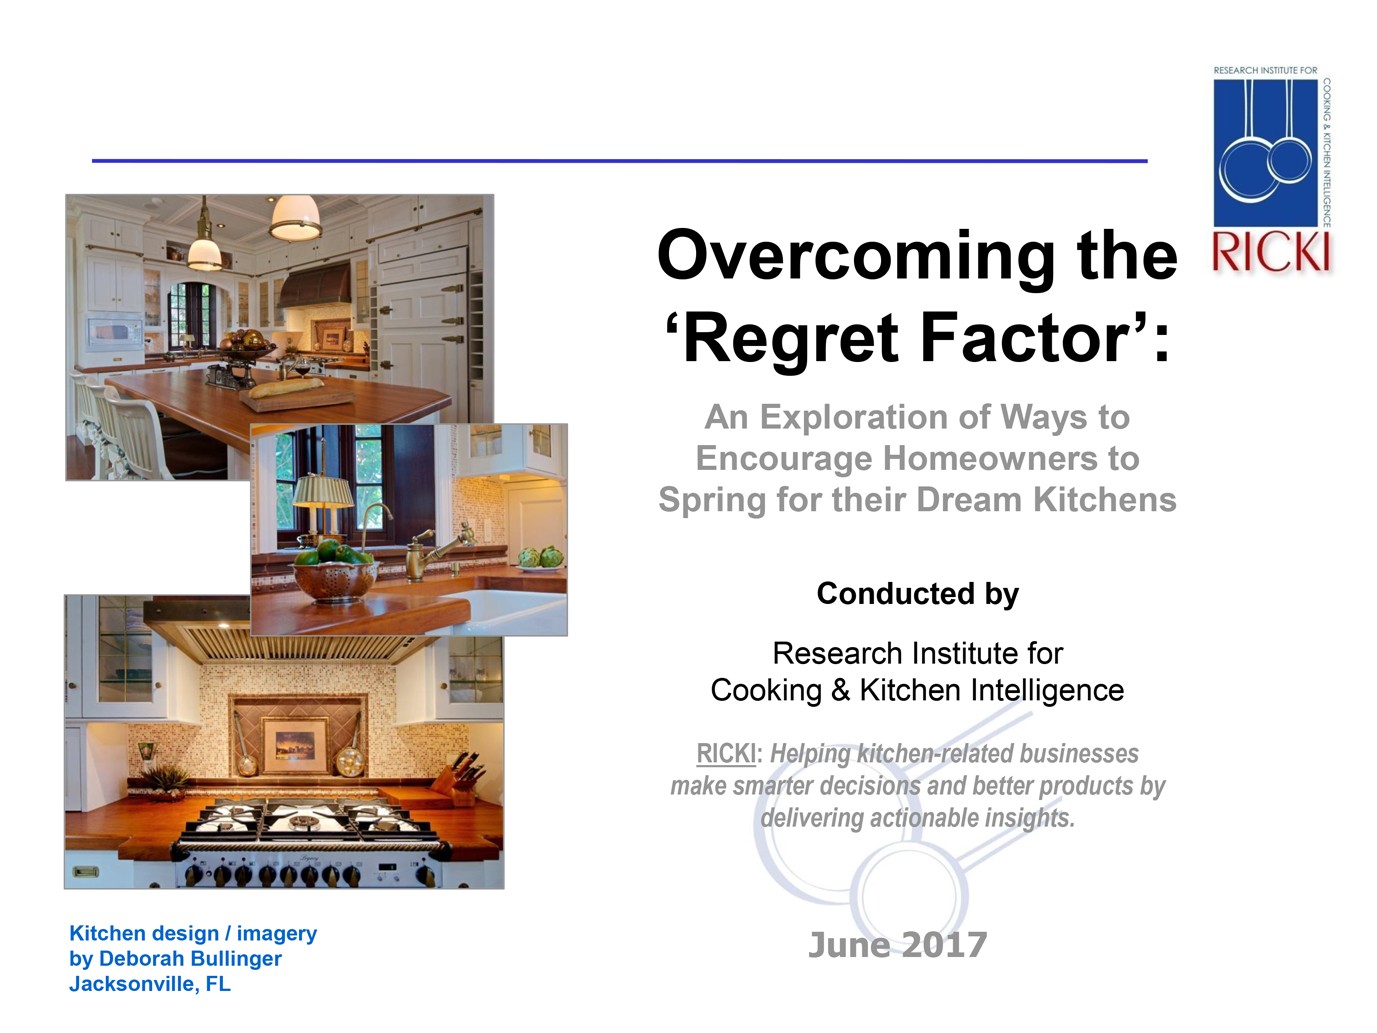 Overcoming the 'Regret Factor': An Exploration of Ways to Encourage Homeowners to Spring for their Dream Kitchens